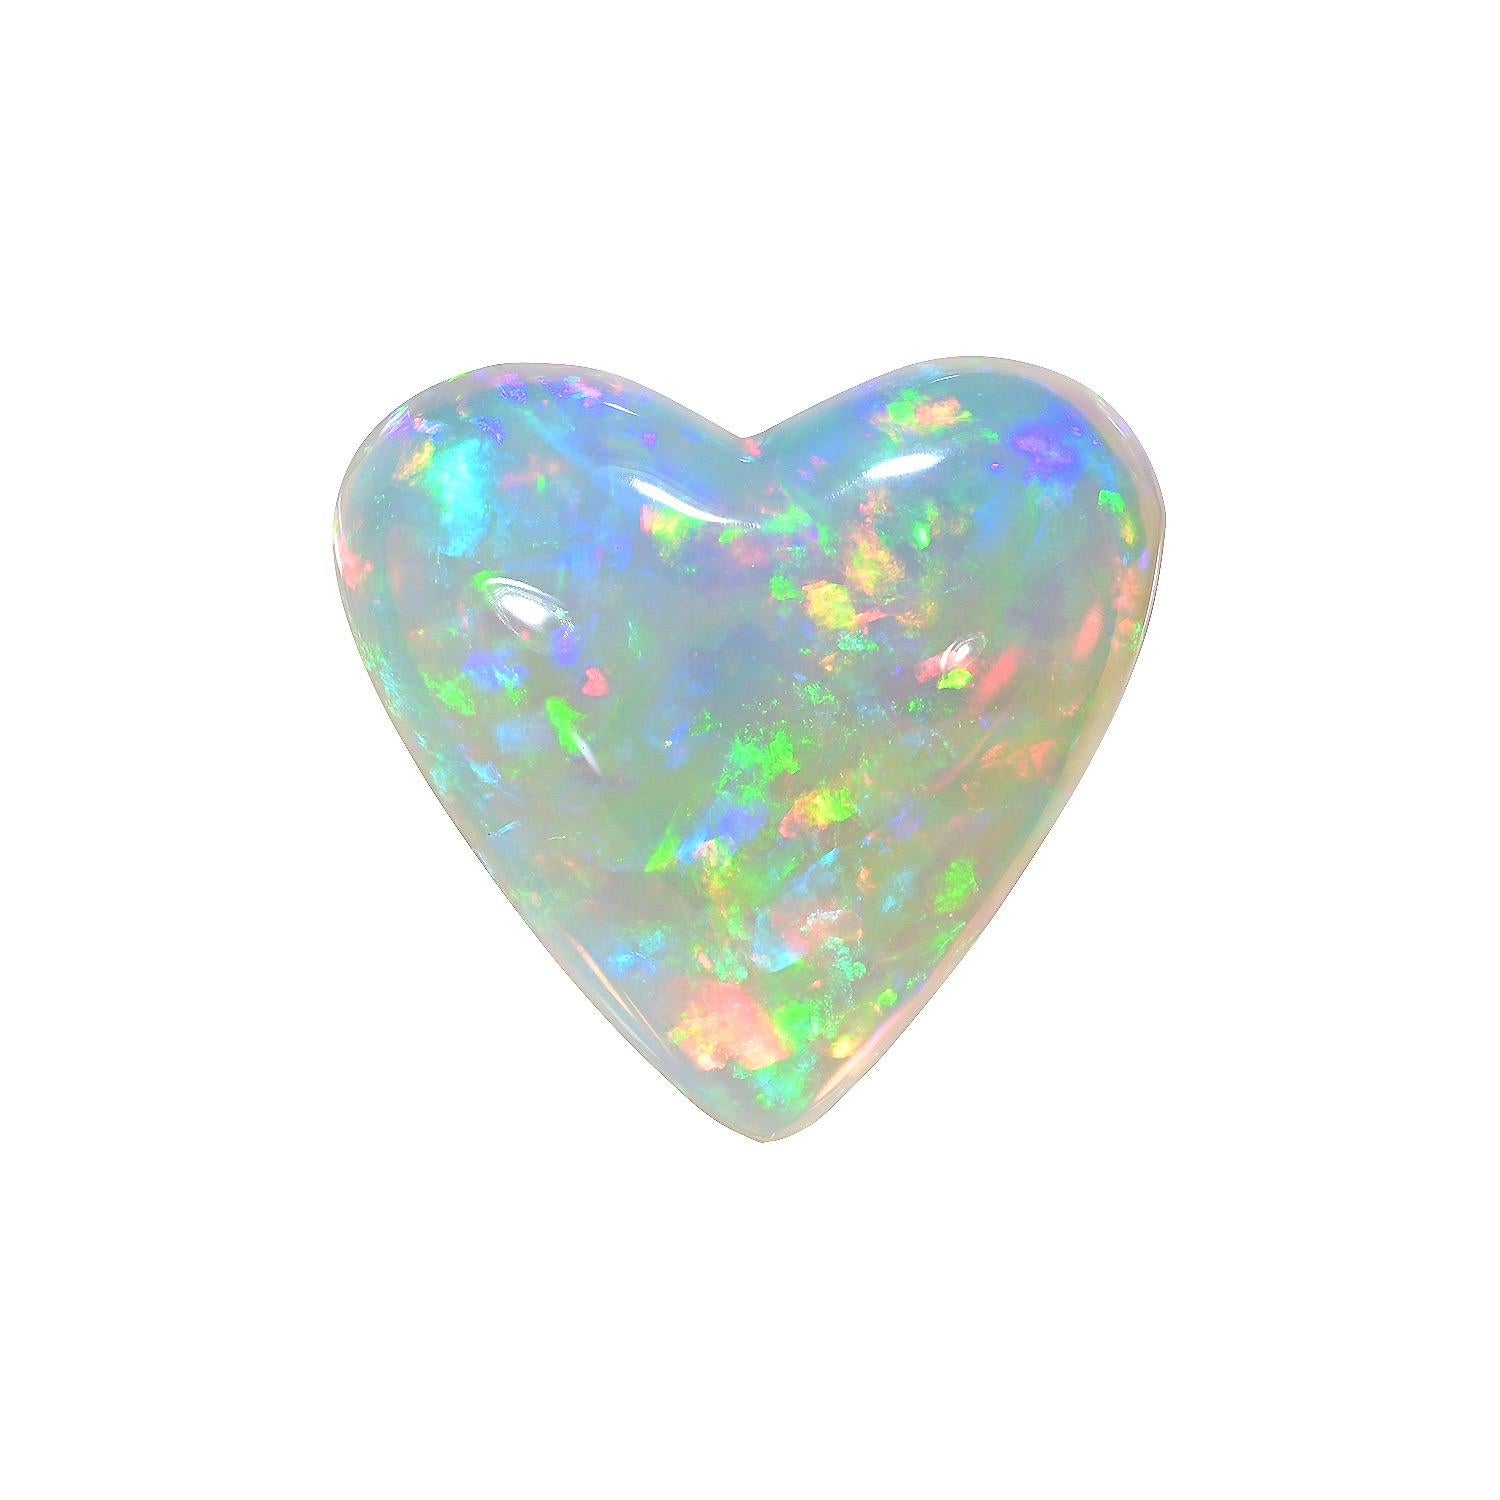 Natural 17.23 Carat Ethiopian Opal loose gemstone, offered unmounted to someone very special.
Returns are accepted and paid by us within 7 days of delivery.
We offer supreme custom jewelry work upon request. Please contact us for more details.
For